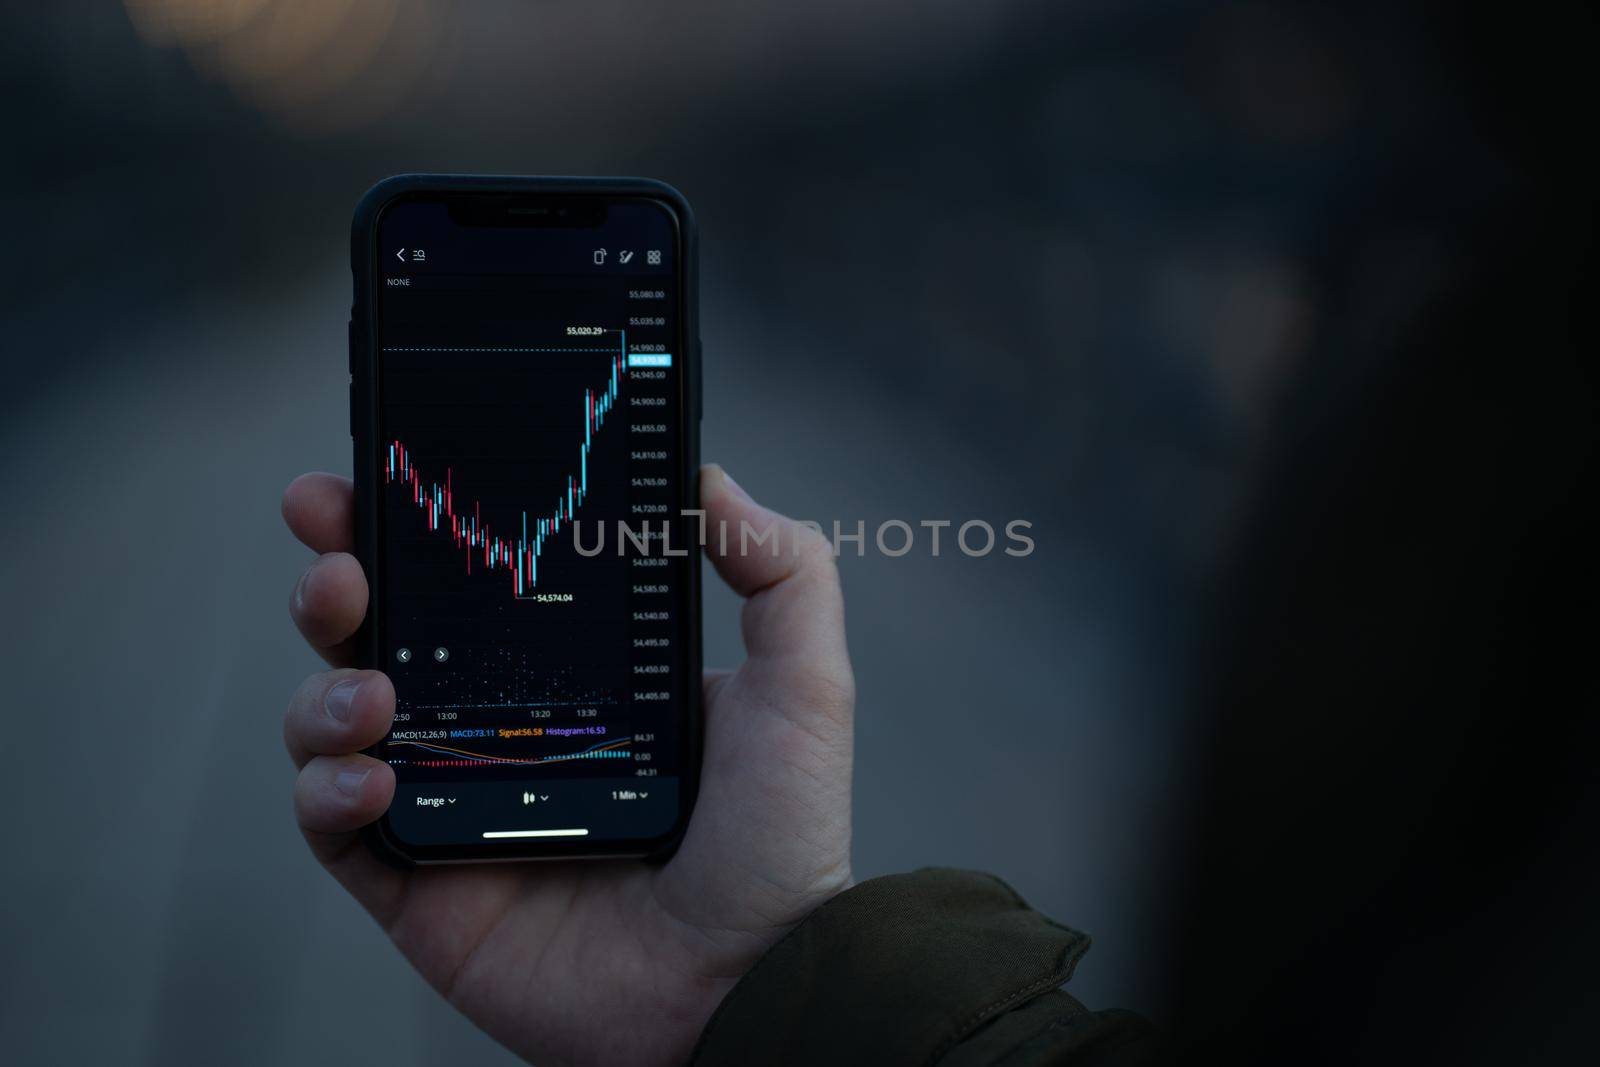 Forex trading. Male hand holding smartphone with candlestick chart on screen, trader reading financial news and checking real time foreign exchange market data in mobile app while stnading outdoors